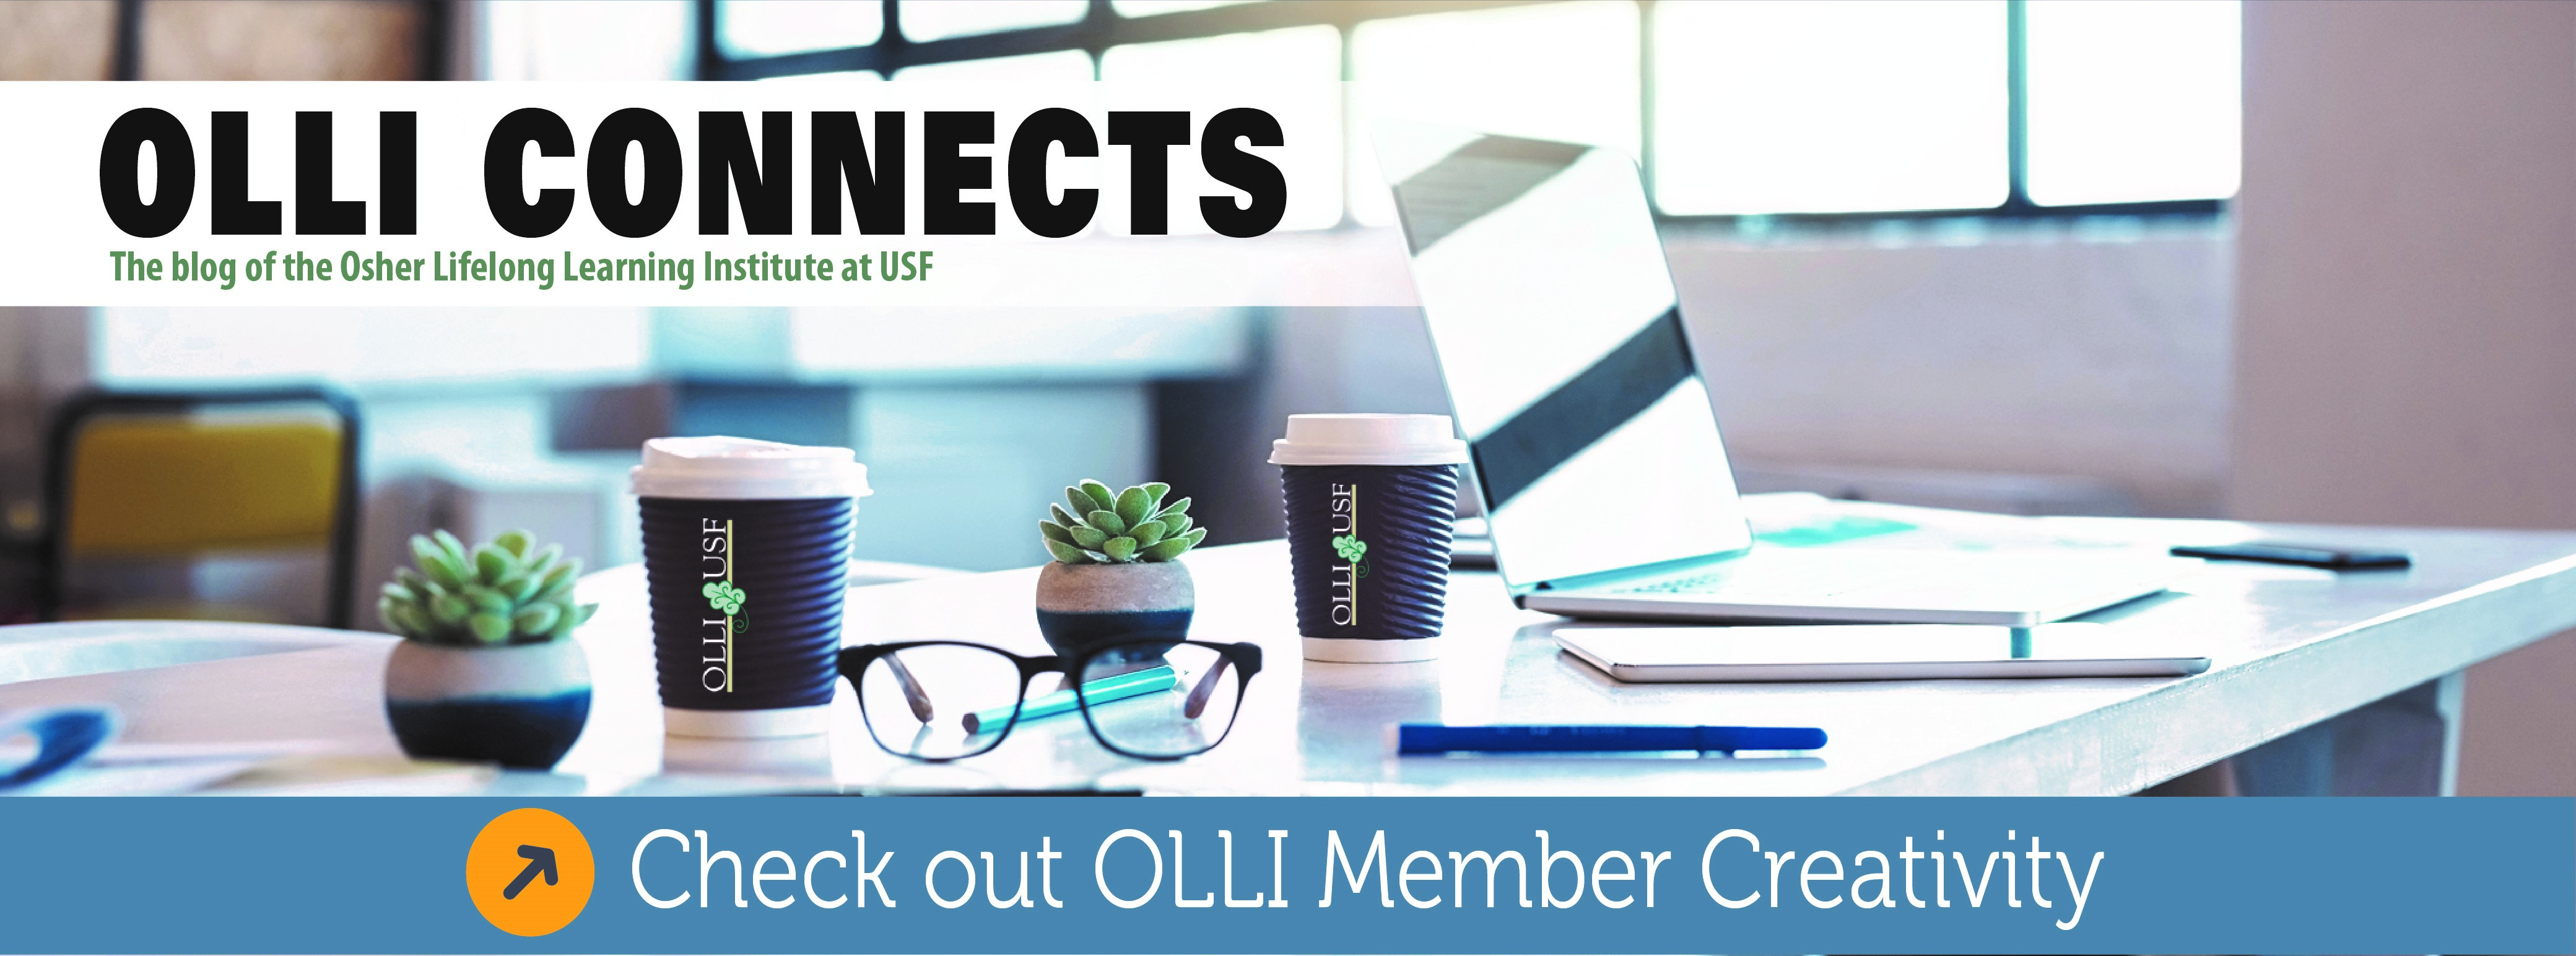 OLLI Connects